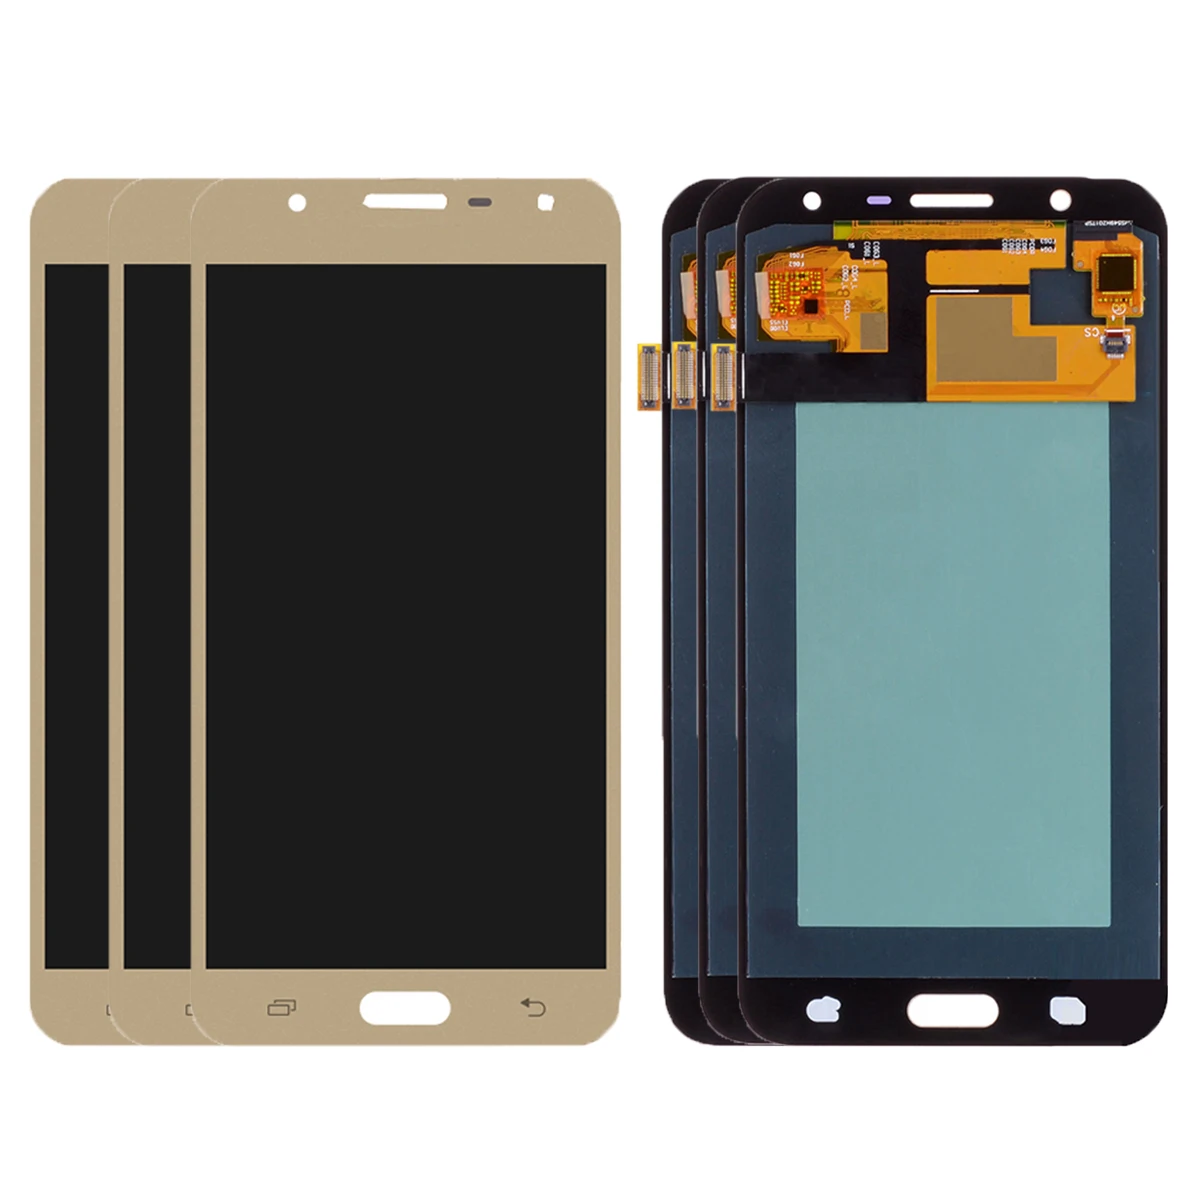 Wholesale Display j7 neo For Samsung Galaxy J7 Nxt J701 J701F J701M  J701FN J7 Neo j701 LCD and Touch Screen Digitizer Assembly enlarge